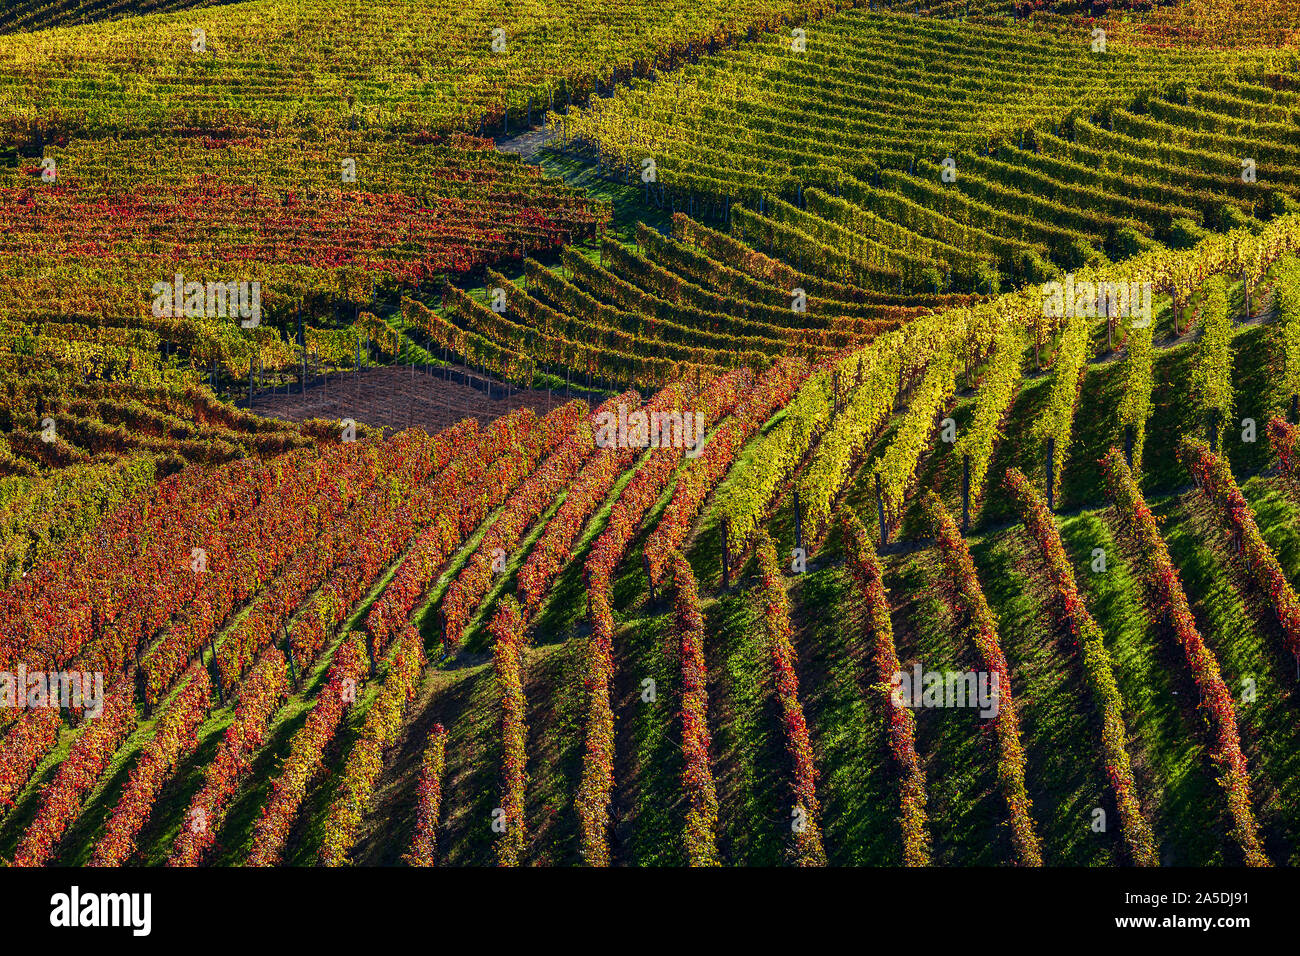 View of autumnal vineyards on the hills of Langhe region in Piedmont, Northern Italy. Stock Photo